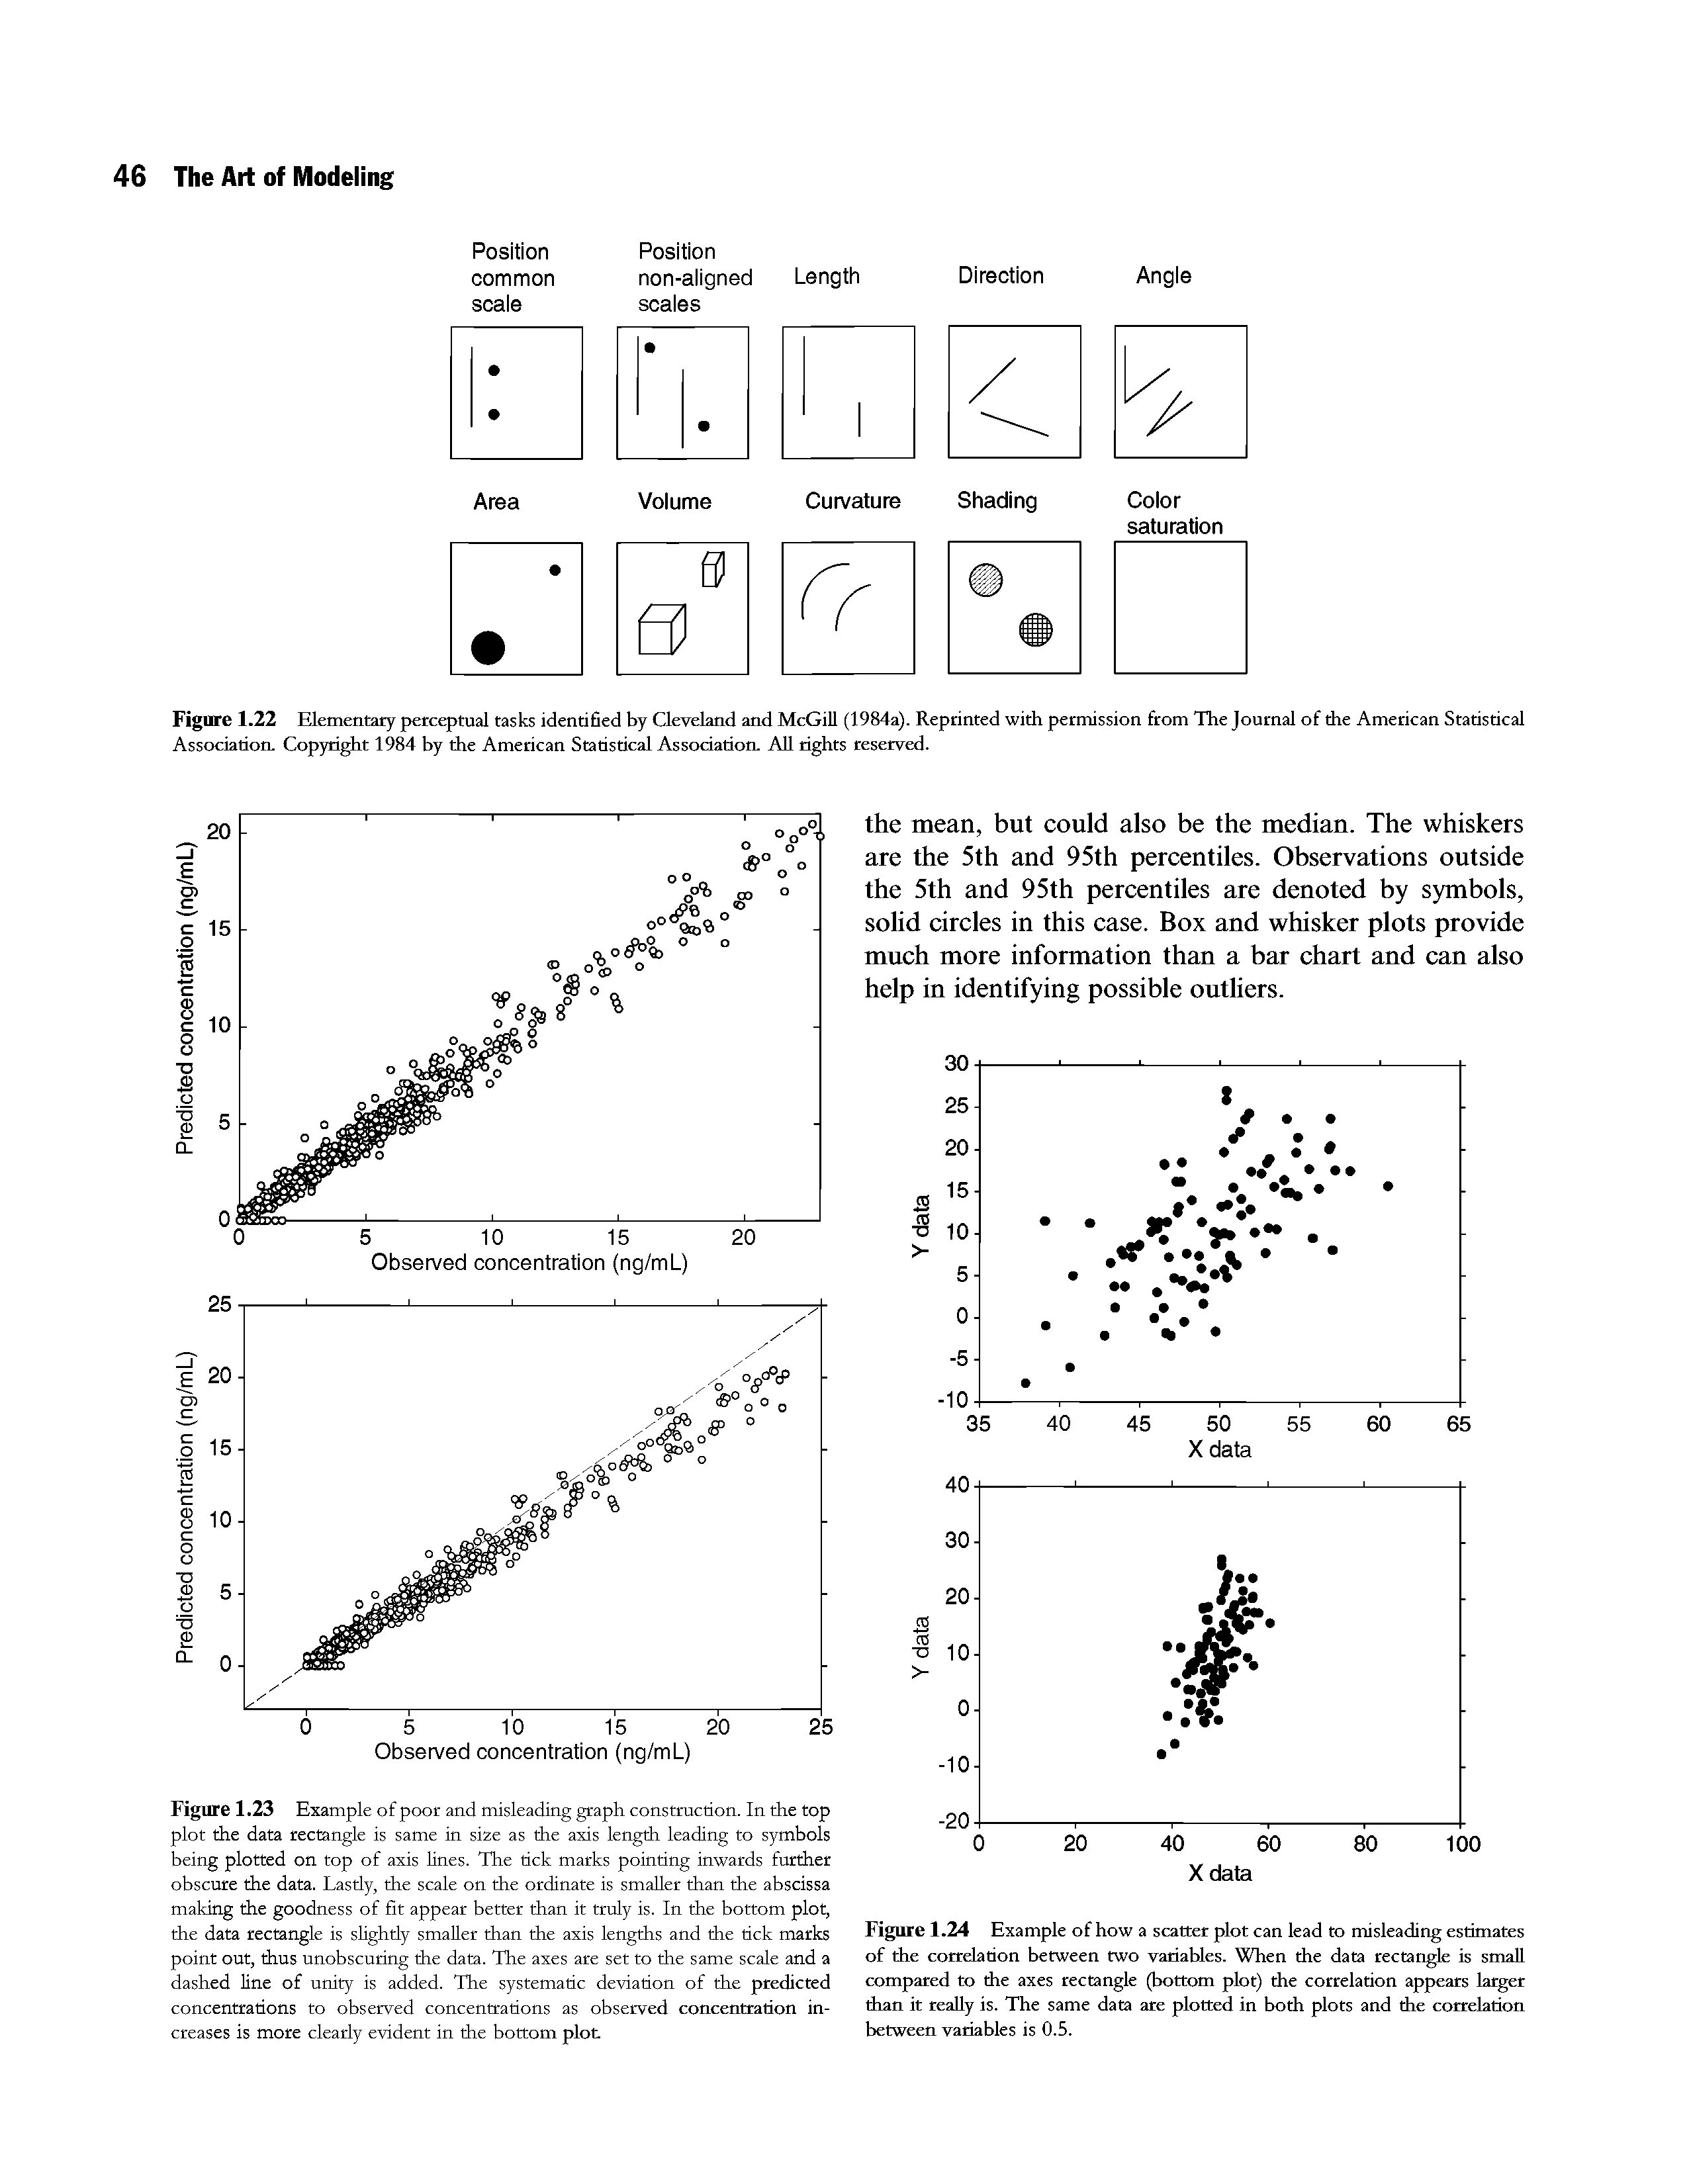 Figure 1.22 Elementary perceptual tasks identified by Cleveland and McGill (1984a). Reprinted with permission from The Journal of the American Statistical Association. Copyright 1984 by the American Statistical Association. All rights reserved.